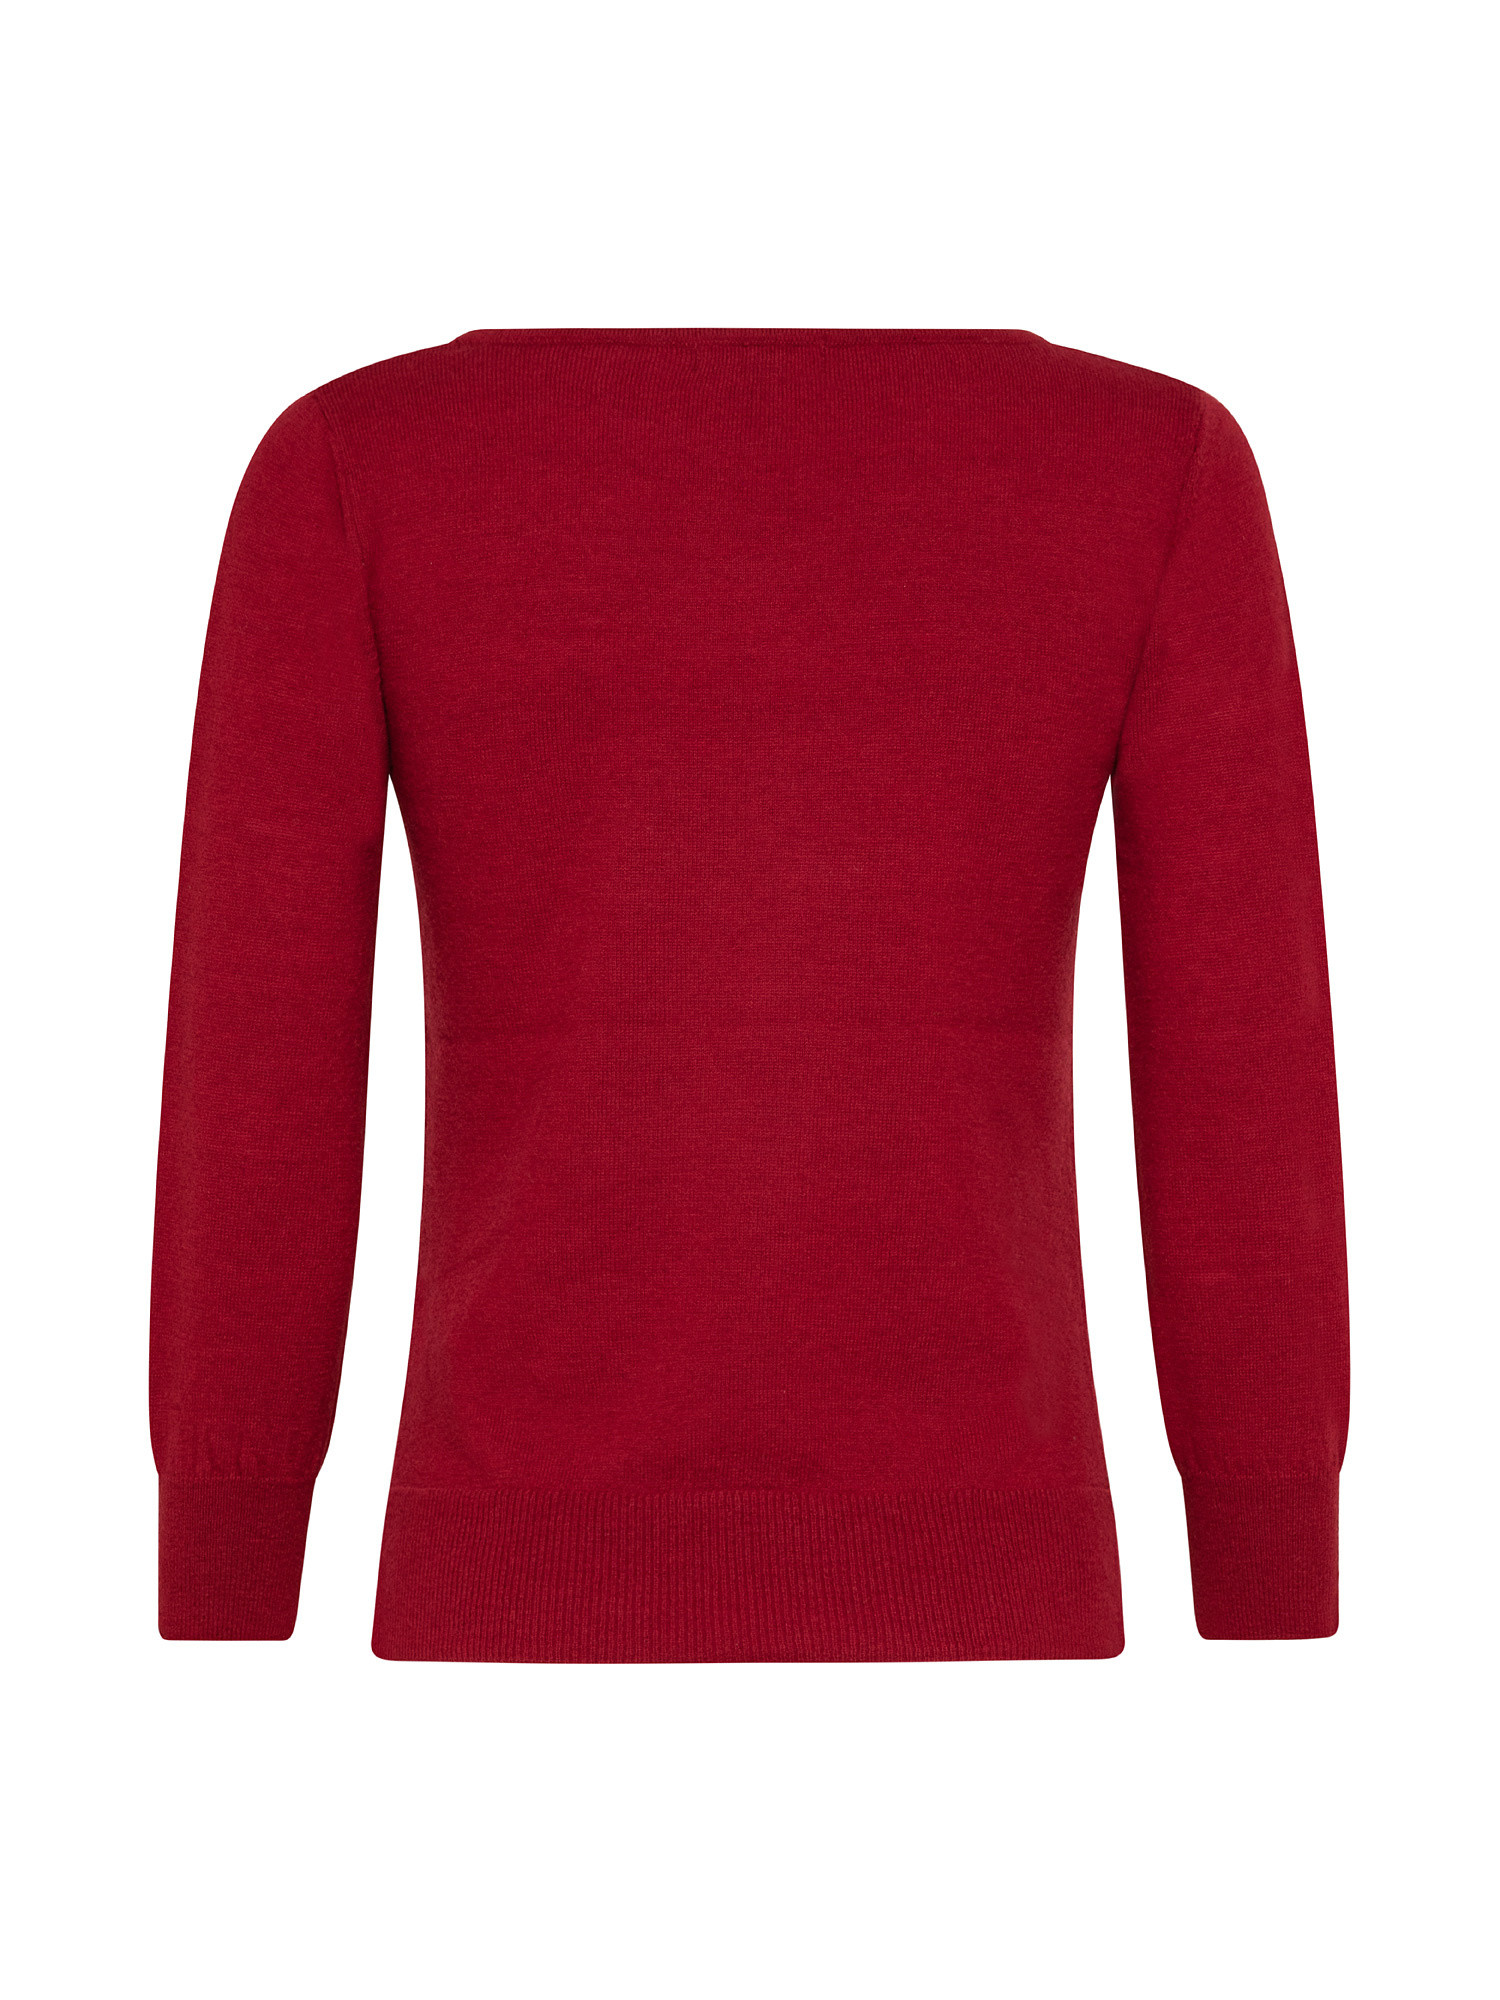 Maglia girocollo, Rosso, large image number 1